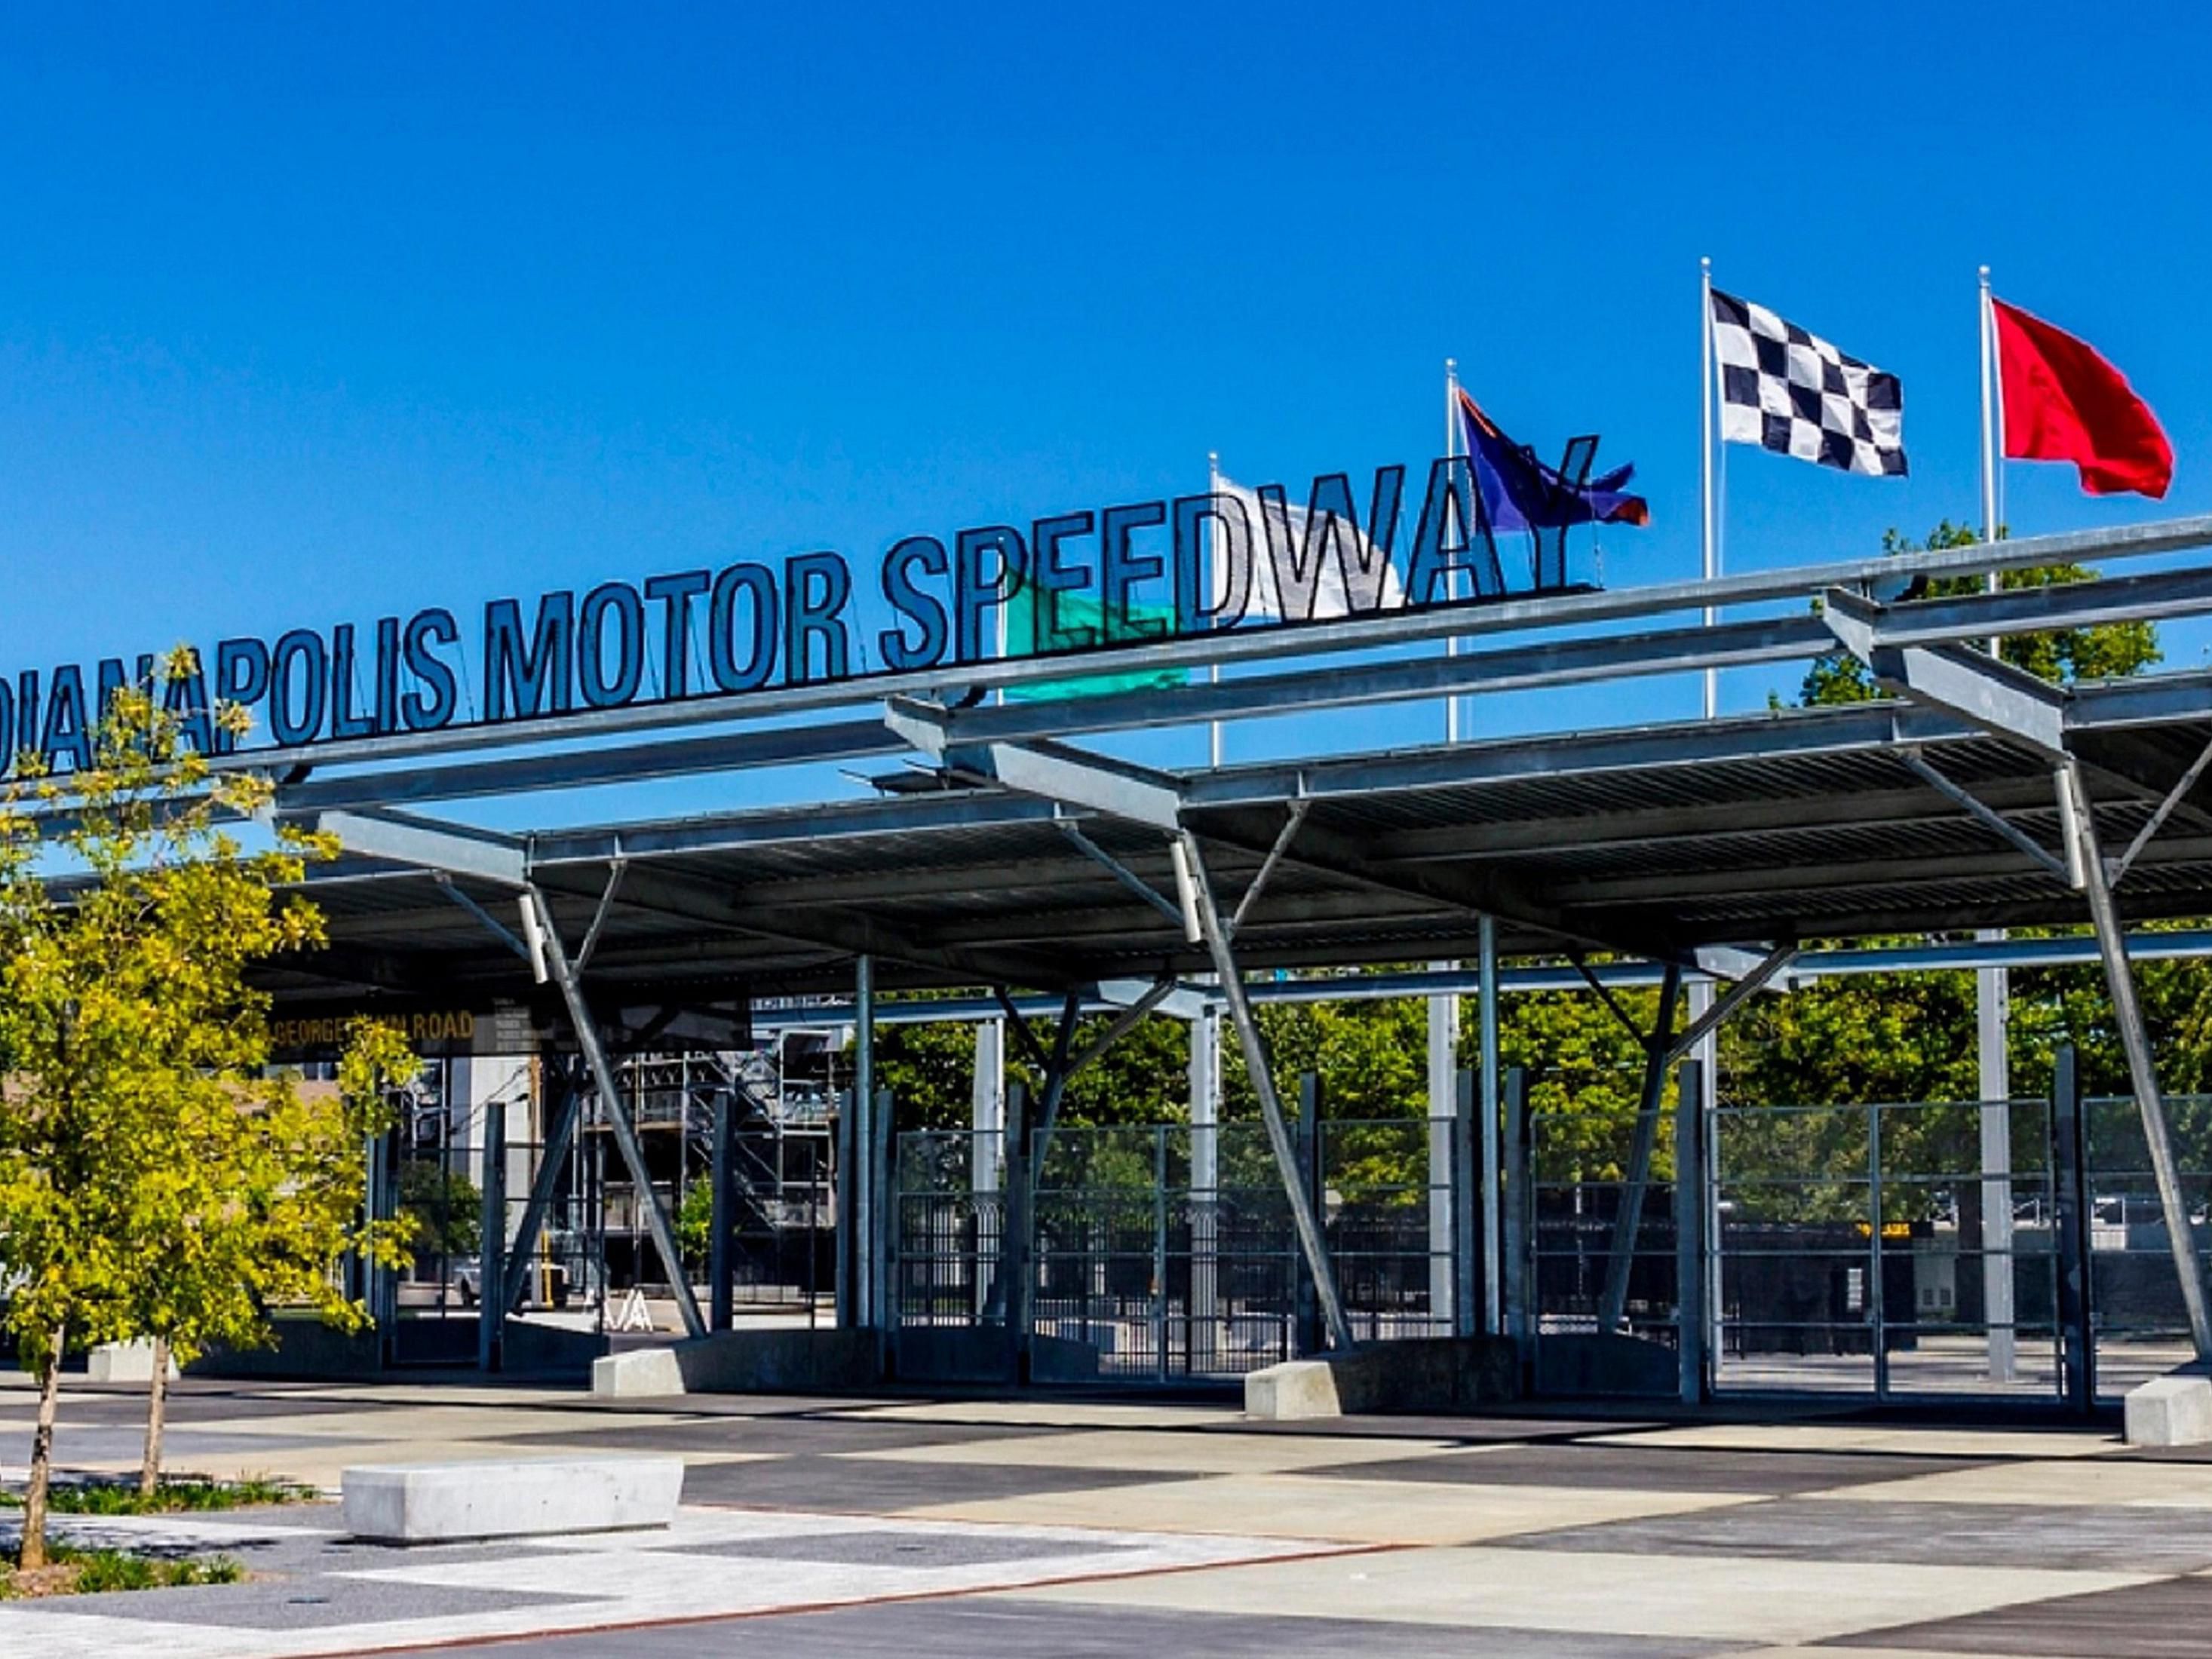 You can't leave without visiting the Indianapolis Motor Speedway. The Indianapolis Motor Speedway is home of the IndyCar Series, NASCAR Cup Series, and many more.